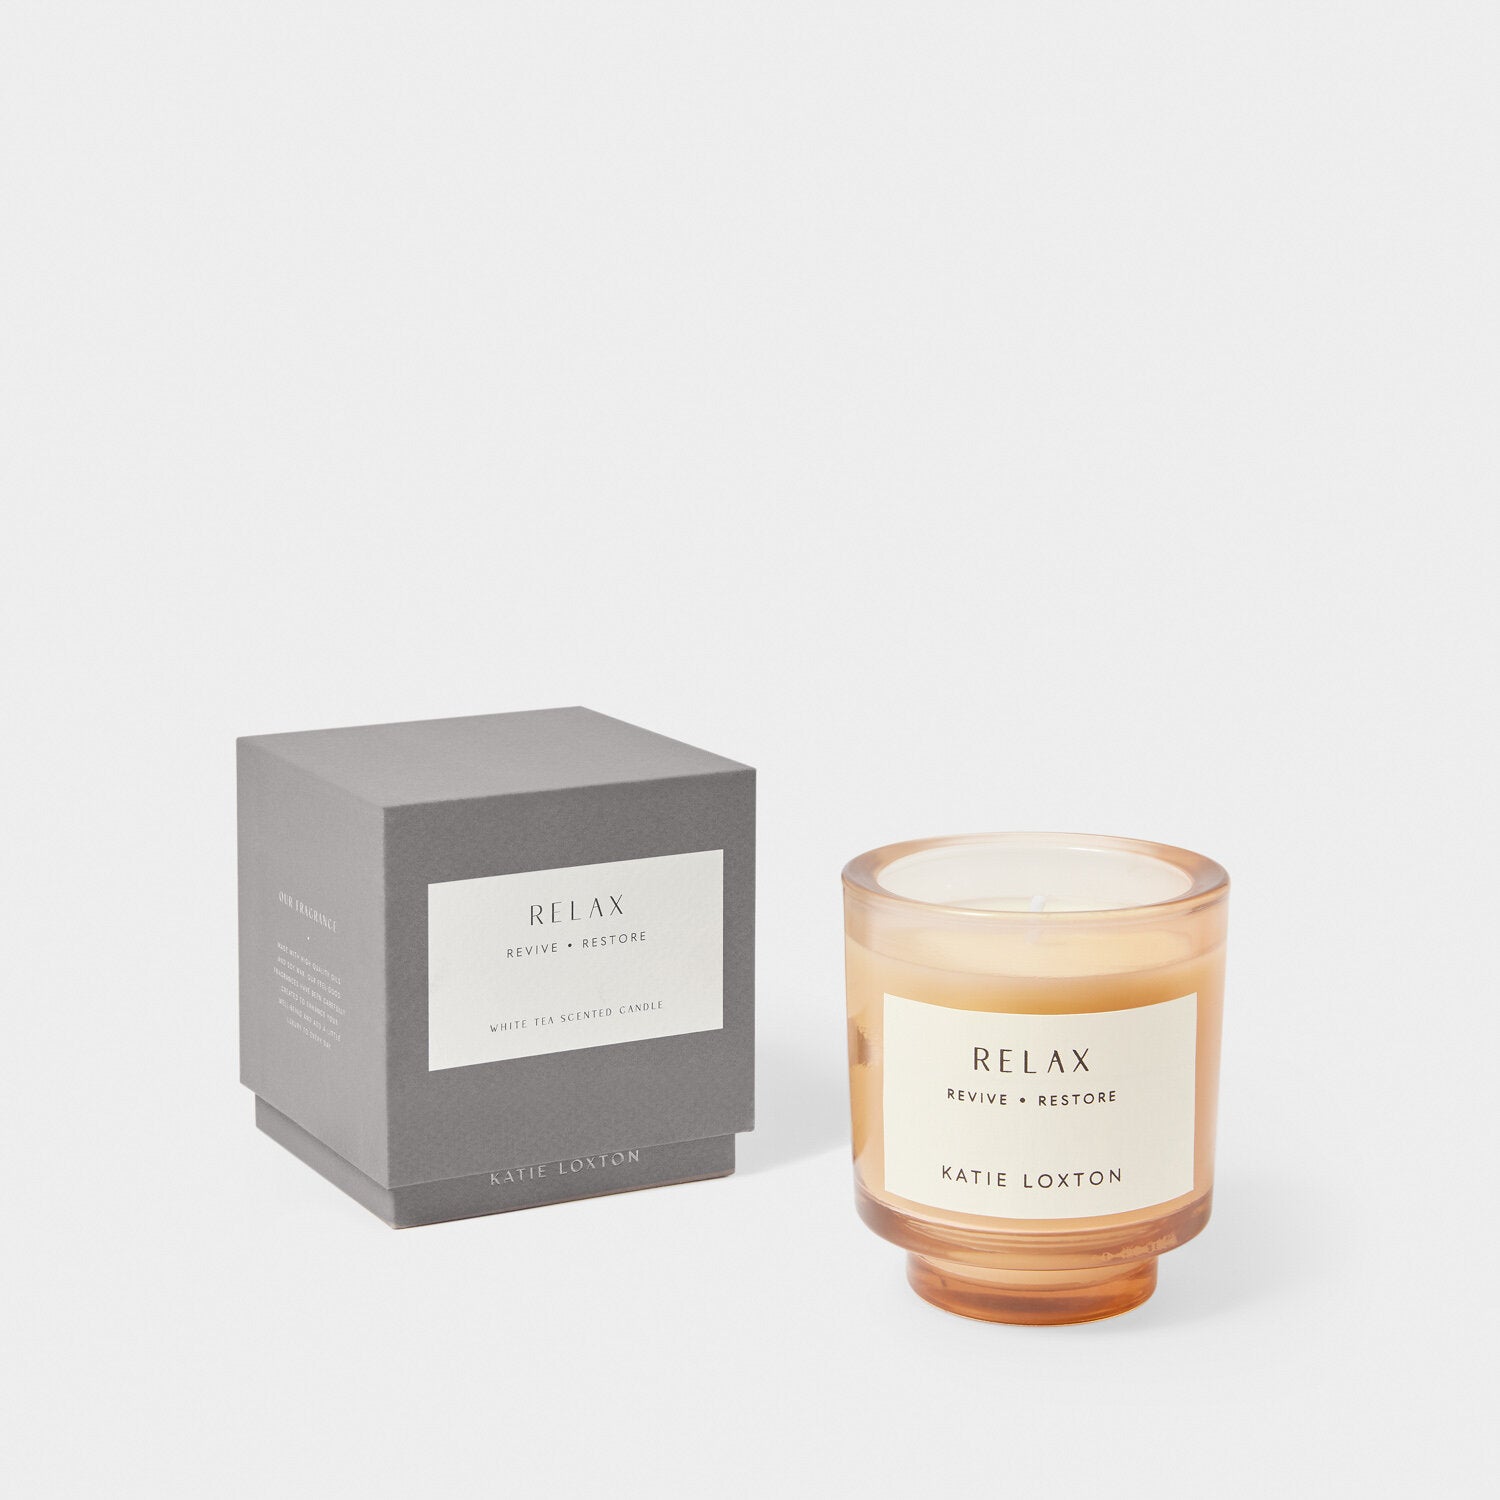 Sentiment Candle 'Relax' - Katie Loxton